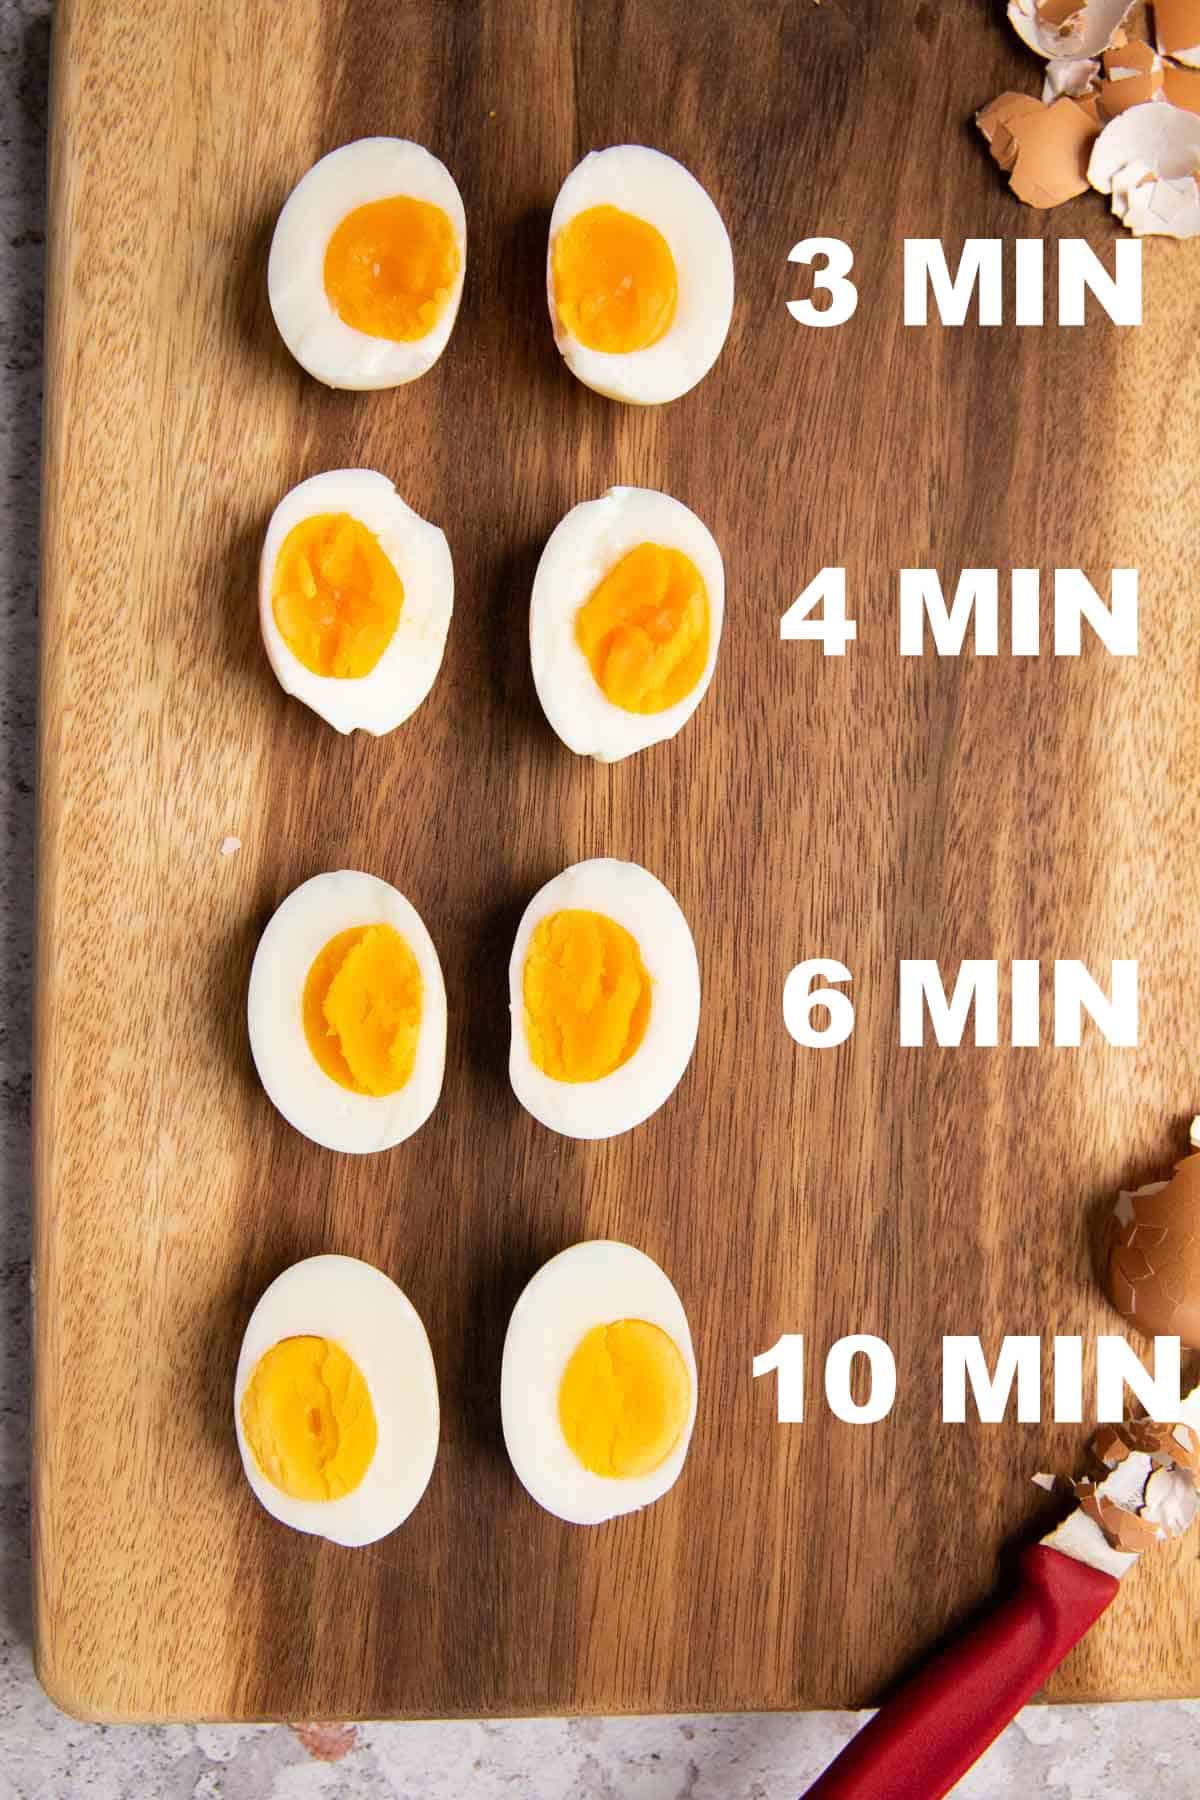 Picture showing how long it takes to hard boil eggs and the results